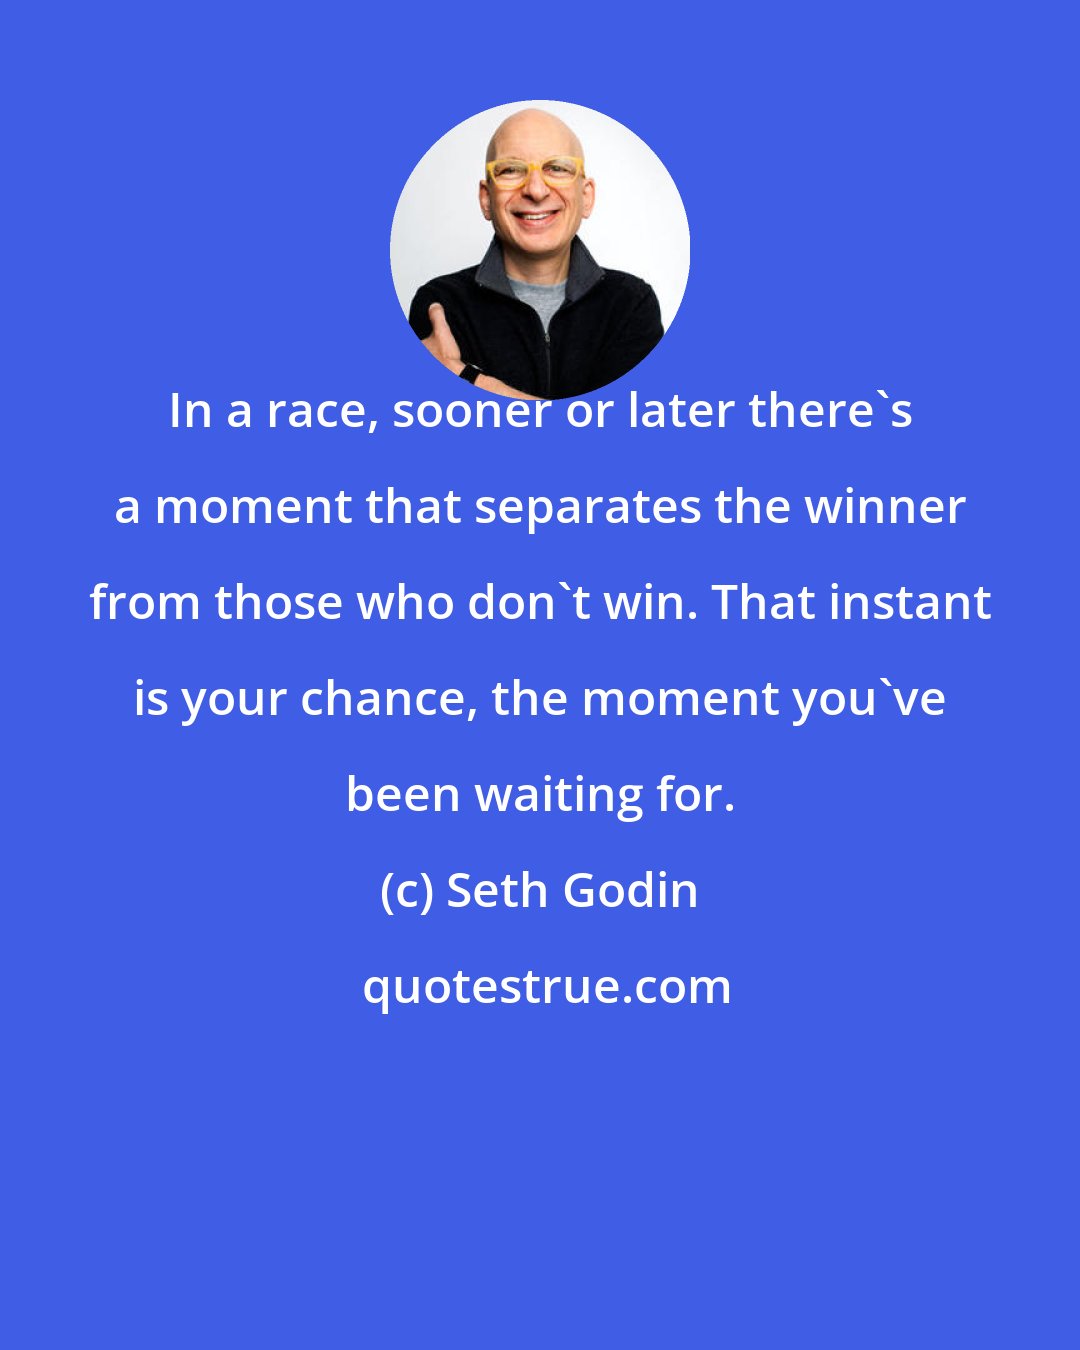 Seth Godin: In a race, sooner or later there's a moment that separates the winner from those who don't win. That instant is your chance, the moment you've been waiting for.